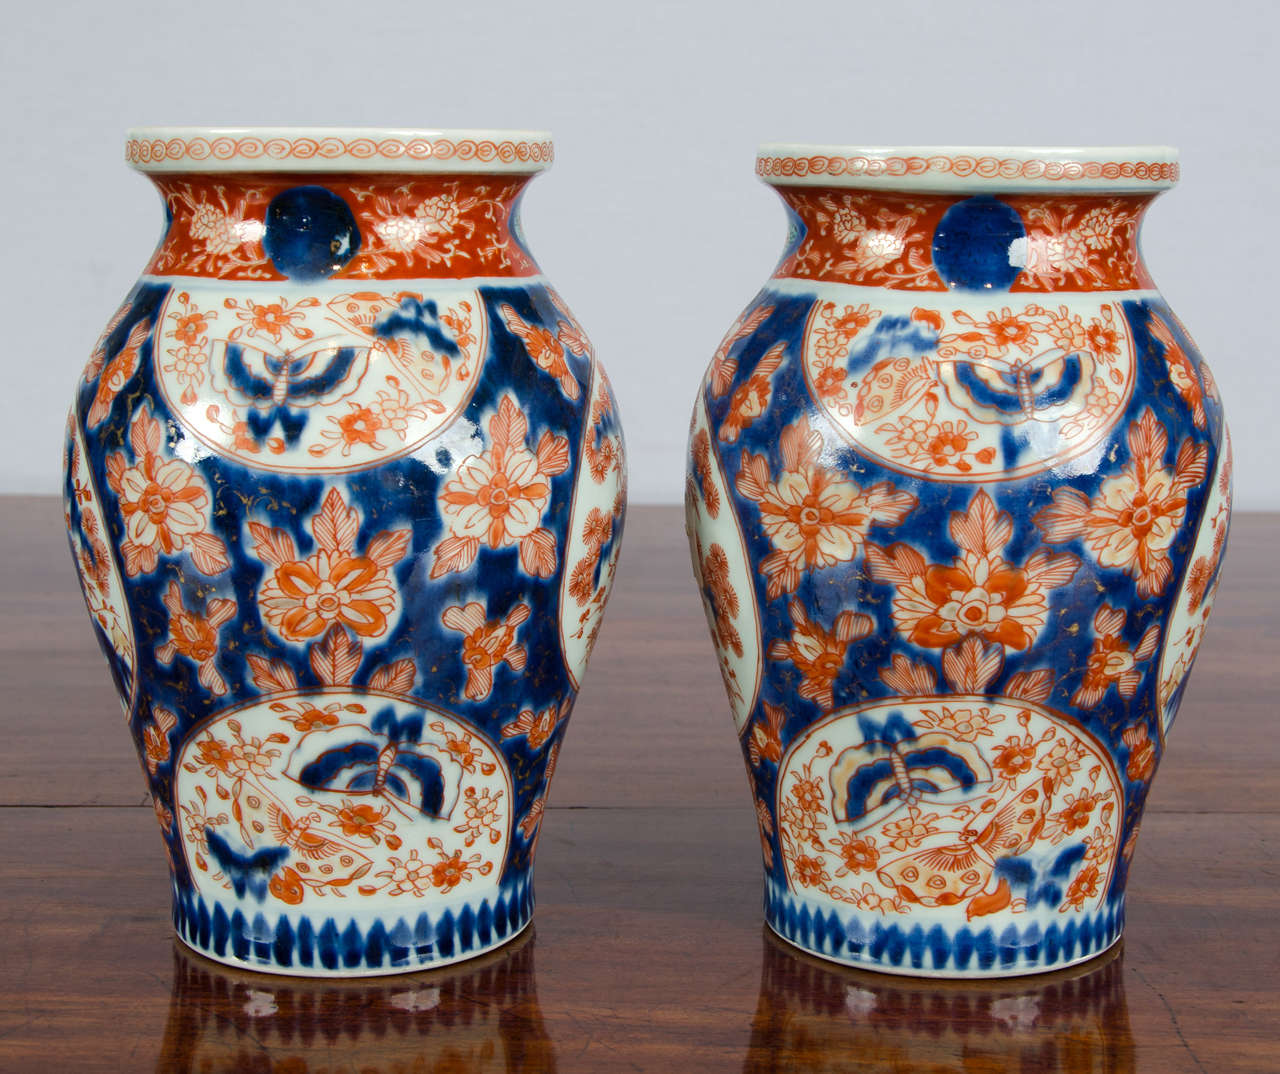 These delicate pair of Japanese Imari vases has a profuse and busy design of floras and butterflies in a Classic bulb shape.